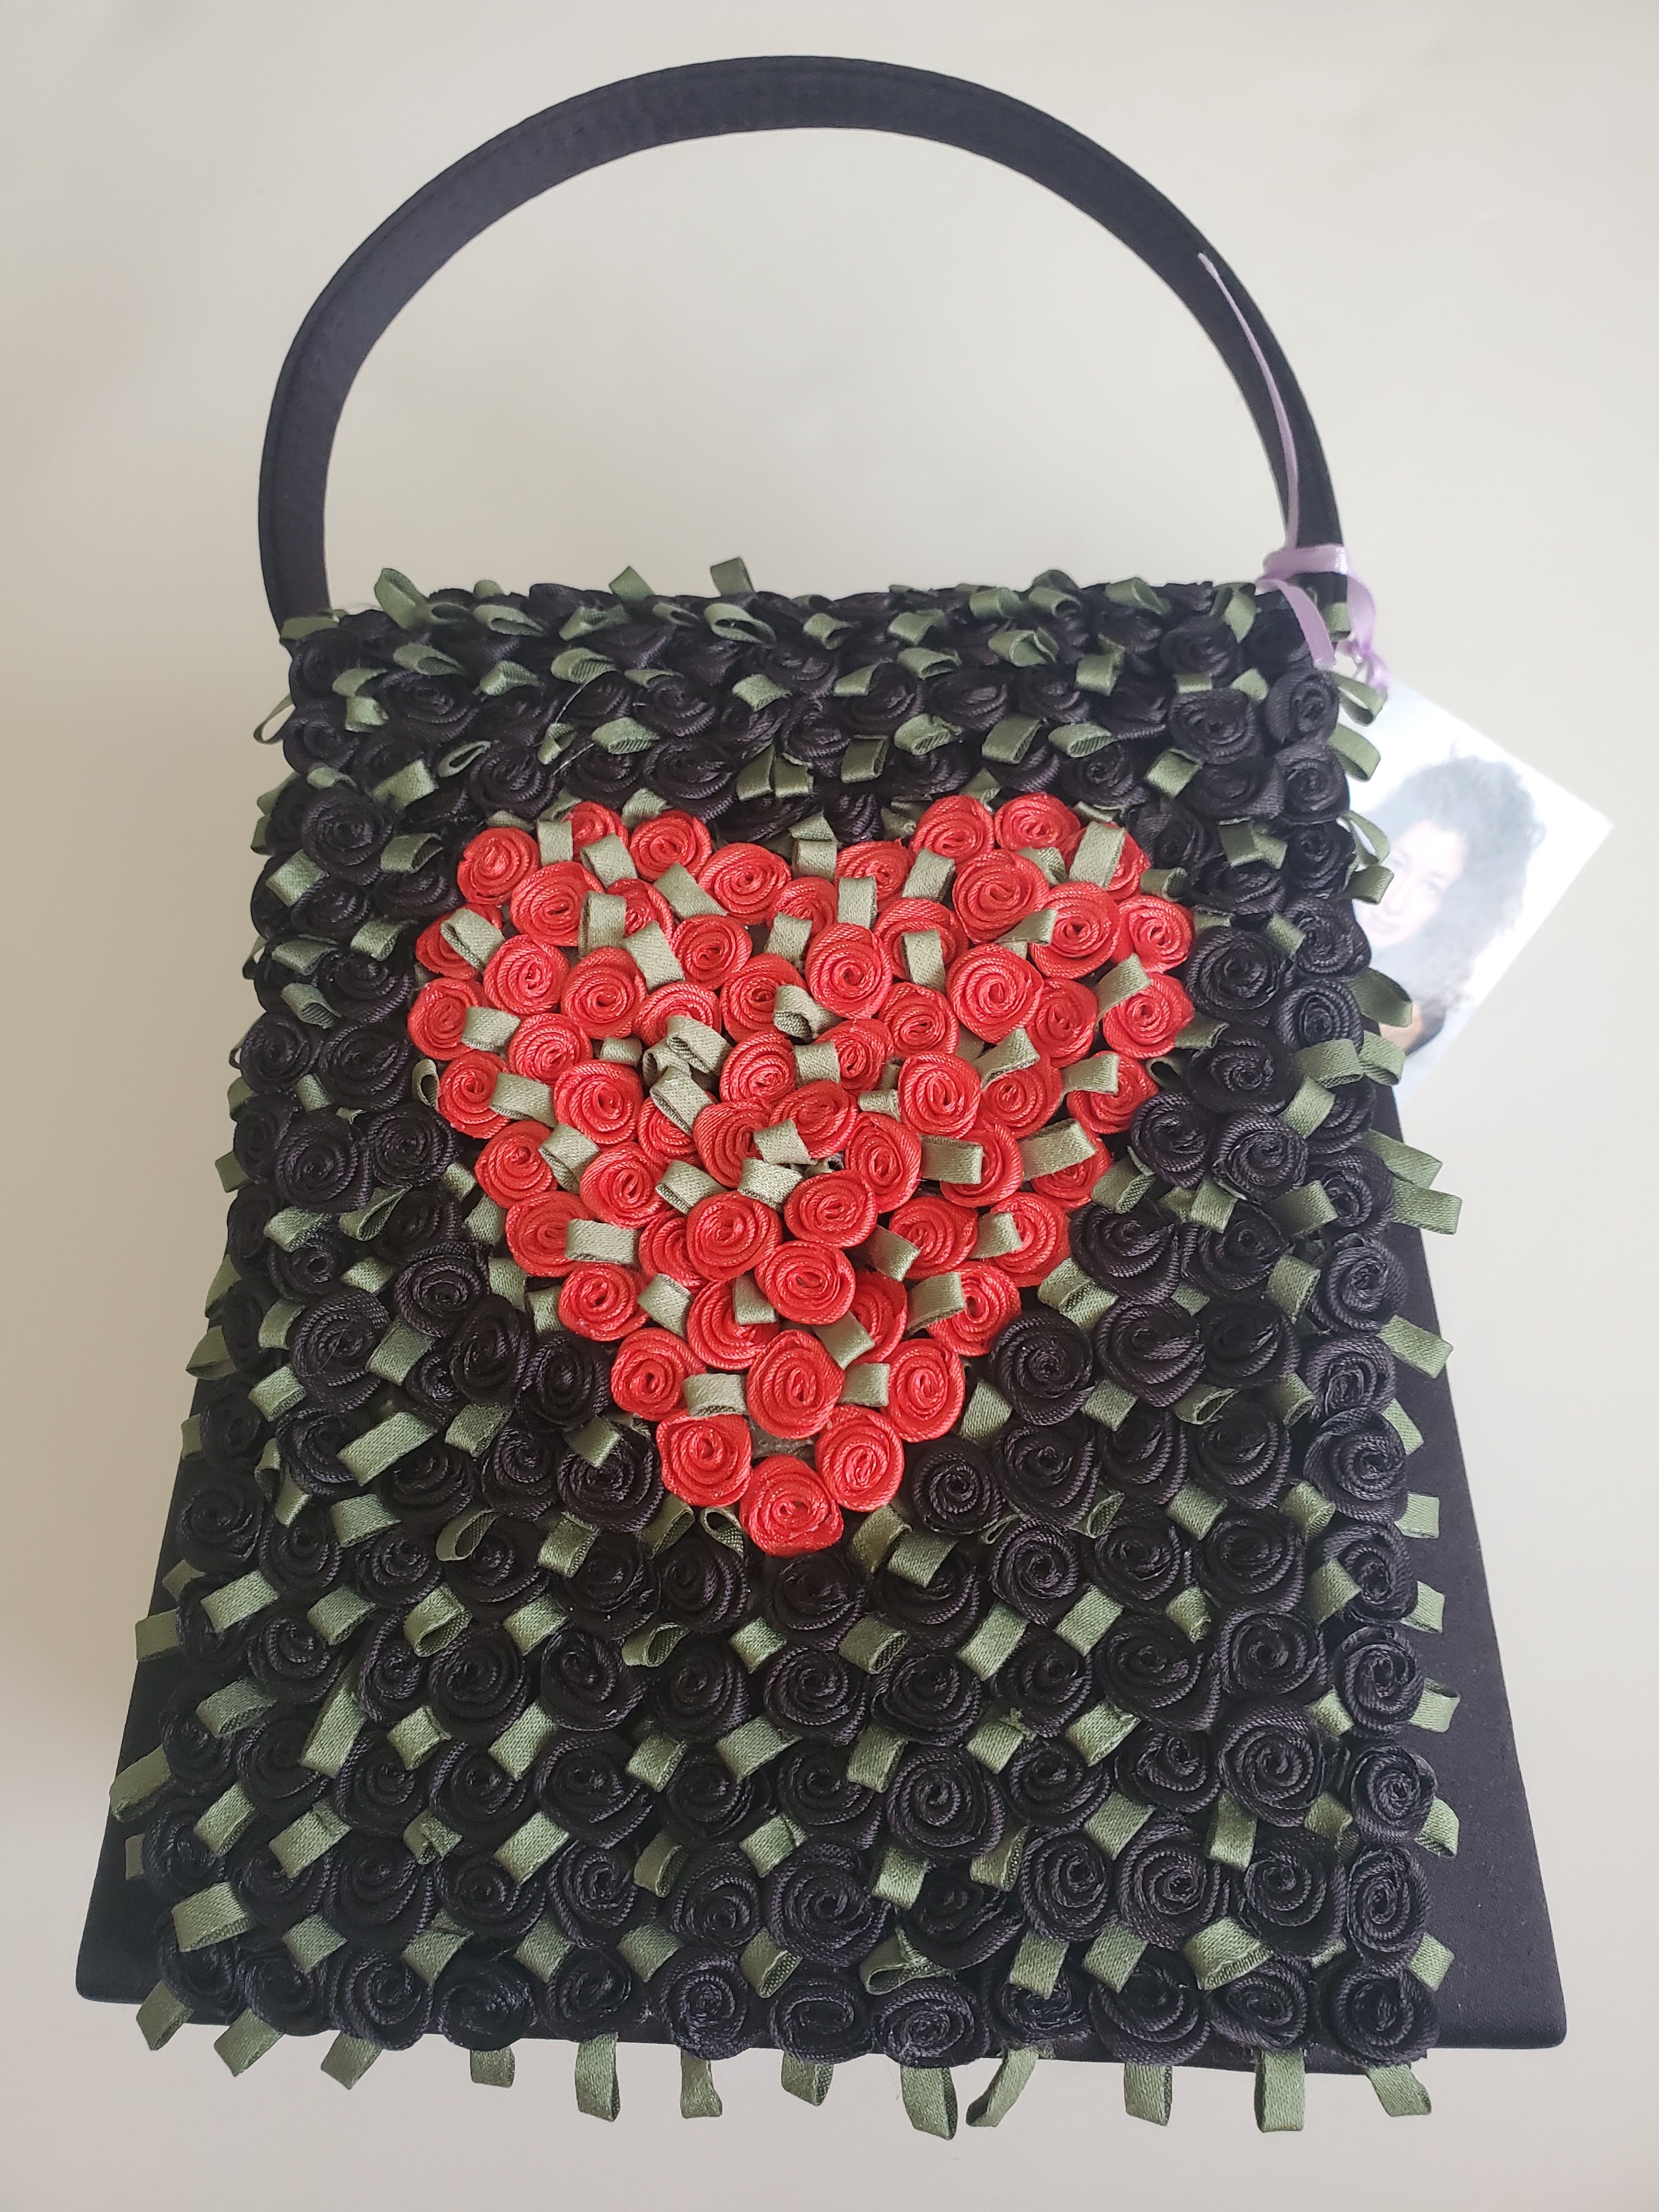 Chic Red Heart Purse Shoulder Bag With Chain Handmade Felt 